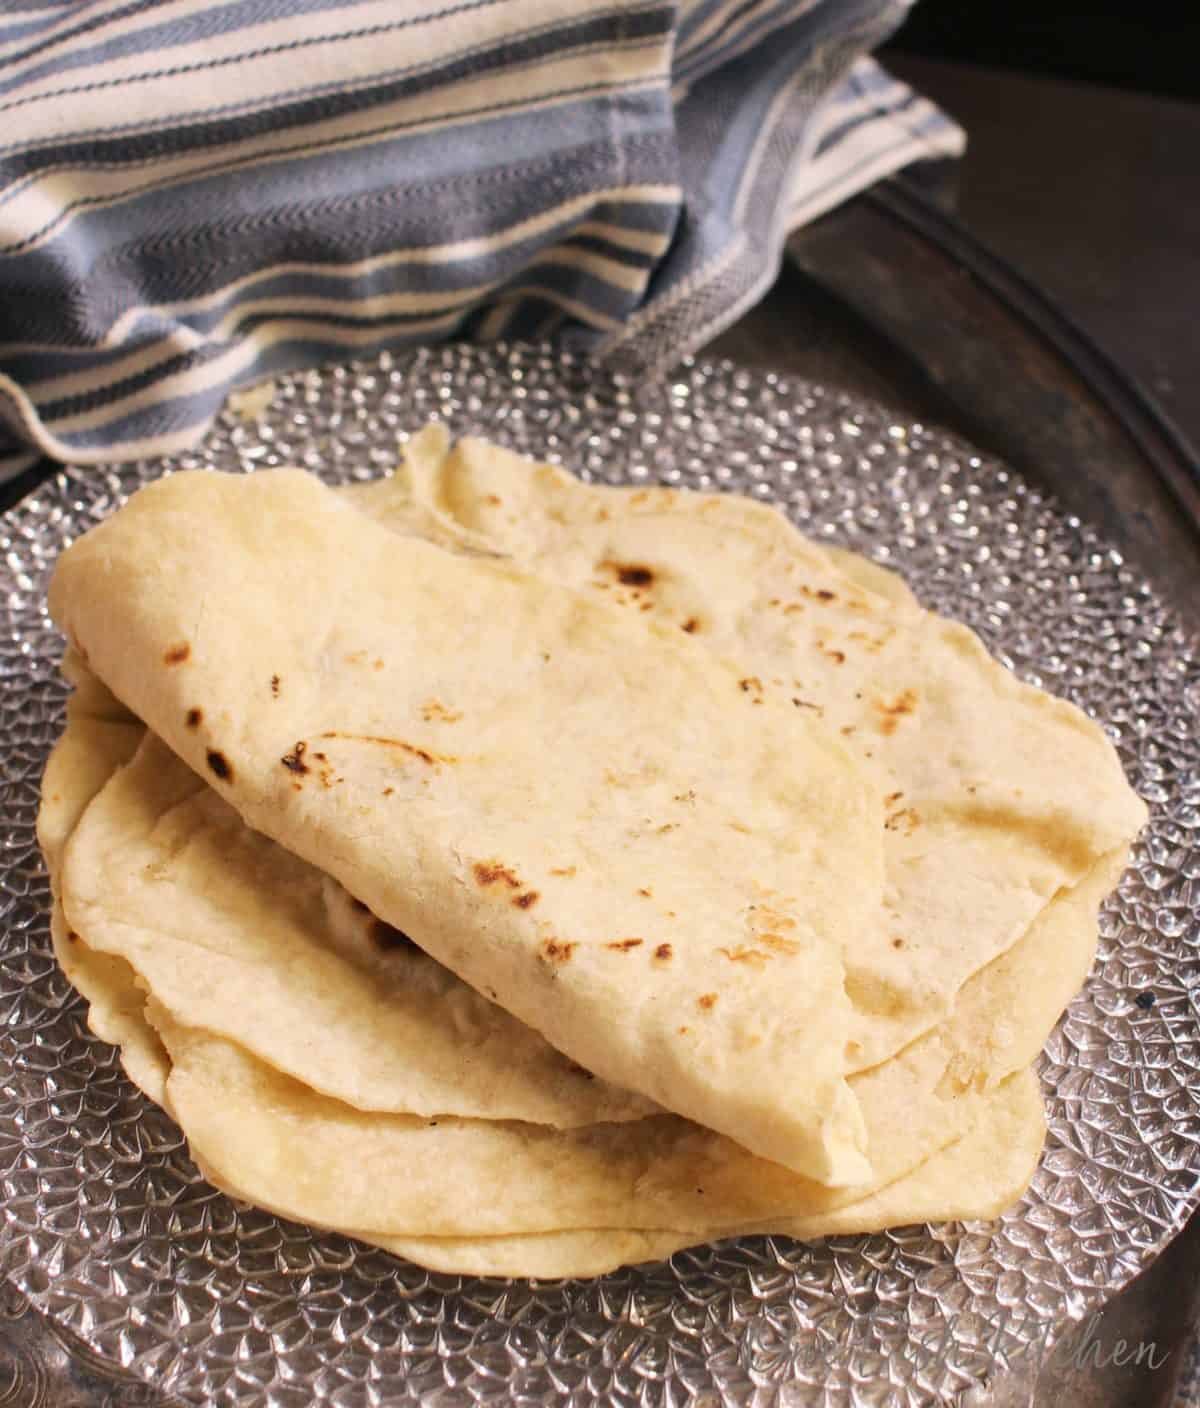 A stack of homemade flour tortillas on a plate placed on a metal tray with a blue and white striped cloth napkin.